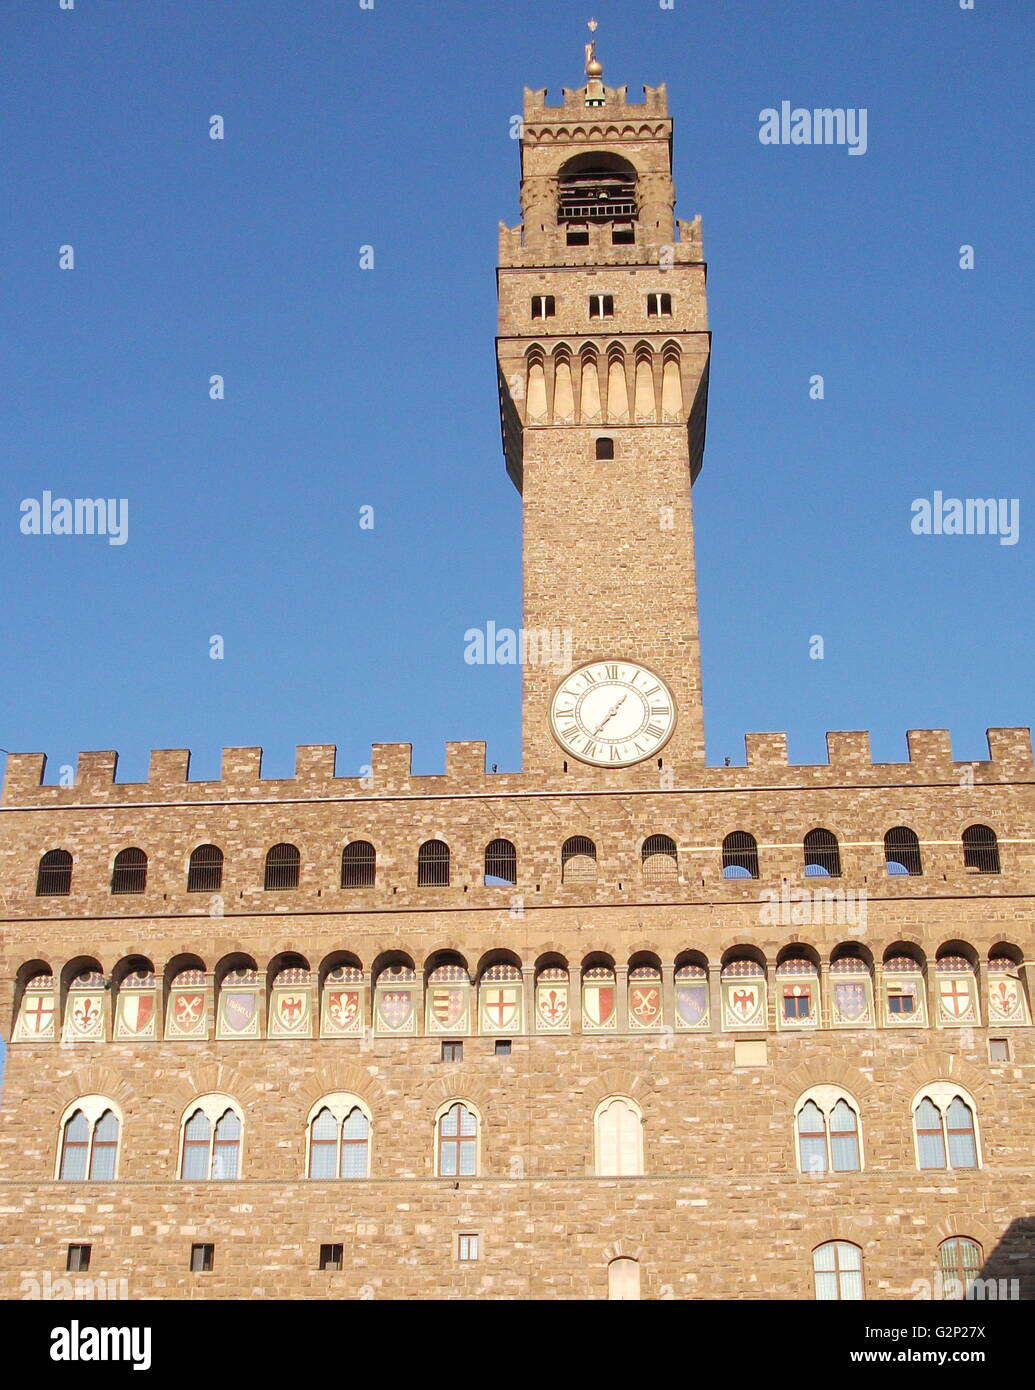 The Palazzo Vecchio. Town hall of Florence, Italy. A huge Romanesque fortress-palace overlooking the Piazza della Signoria. Designed by the architect Arnolfo di Cambio in 1299. A stonework cubicle building forms the base, crowned with a projected battlement clock tower. The current clock was made by Vincenzo Viviani in 1667. Arches in the structure are decorated with the 9 coats of arms of the Florentine Republic. Stock Photo